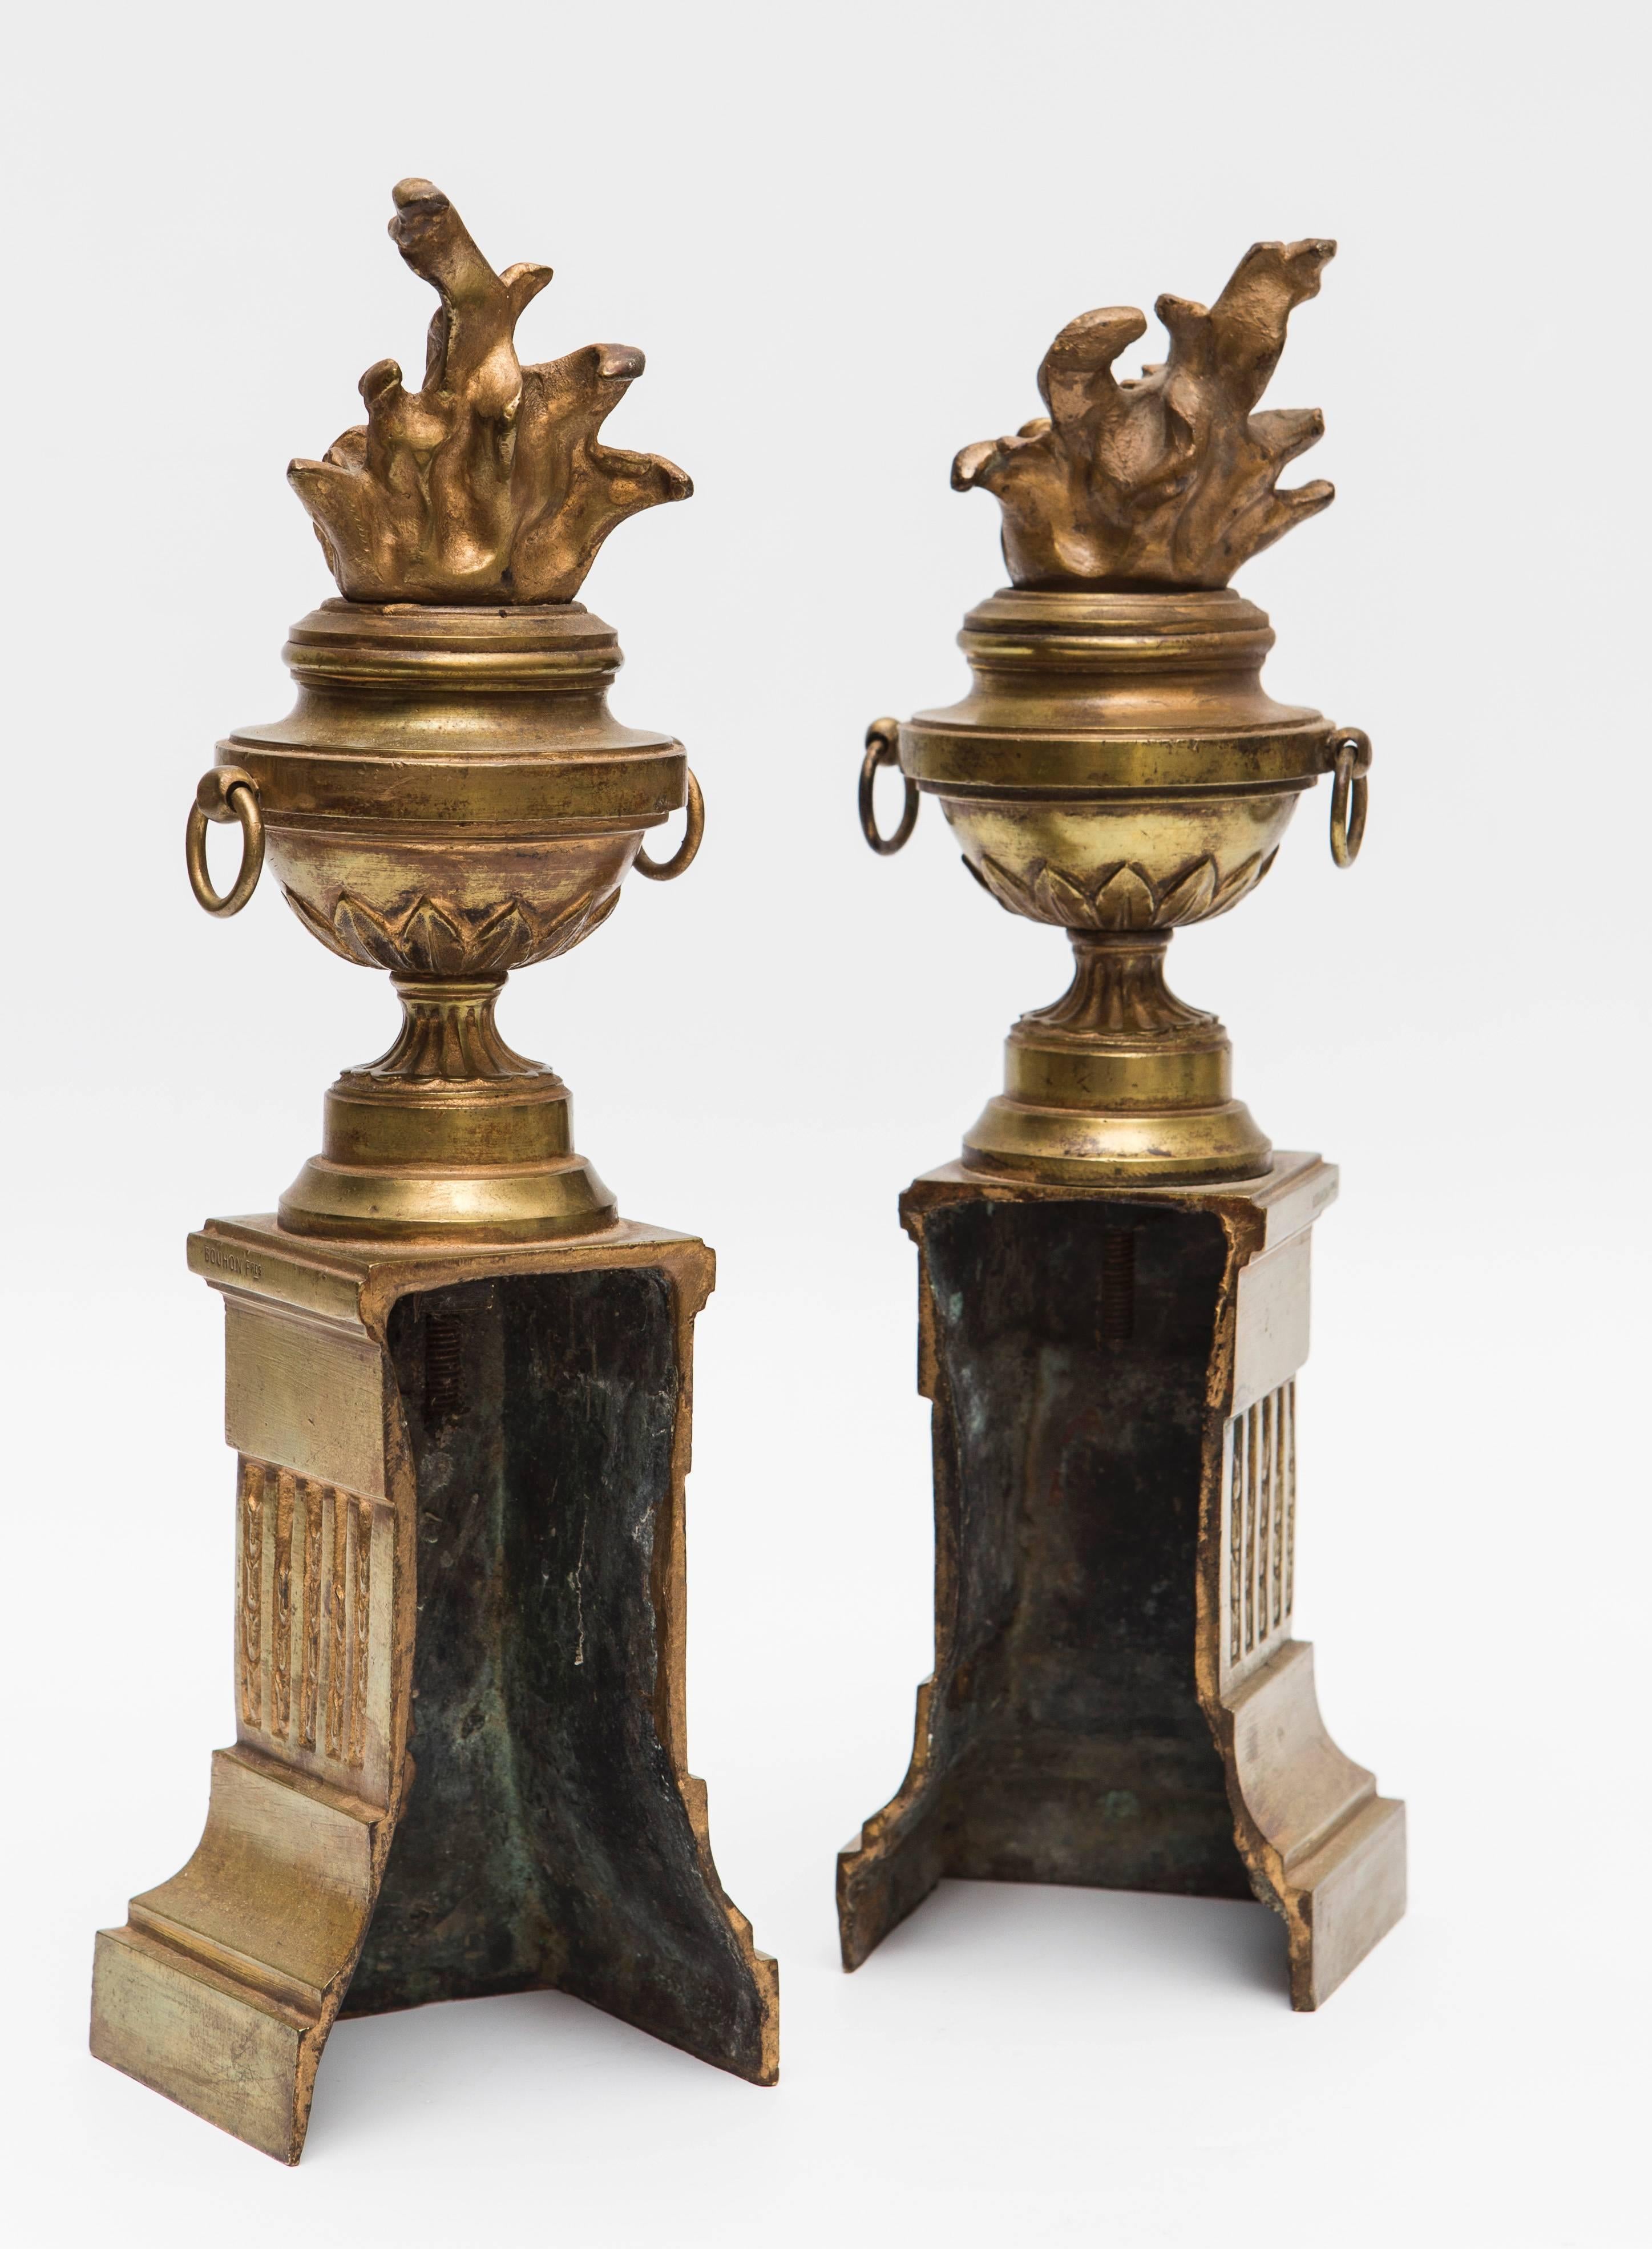 These 19th Century Brass Flame Torch bookends make the perfect accessory to any bookshelf.